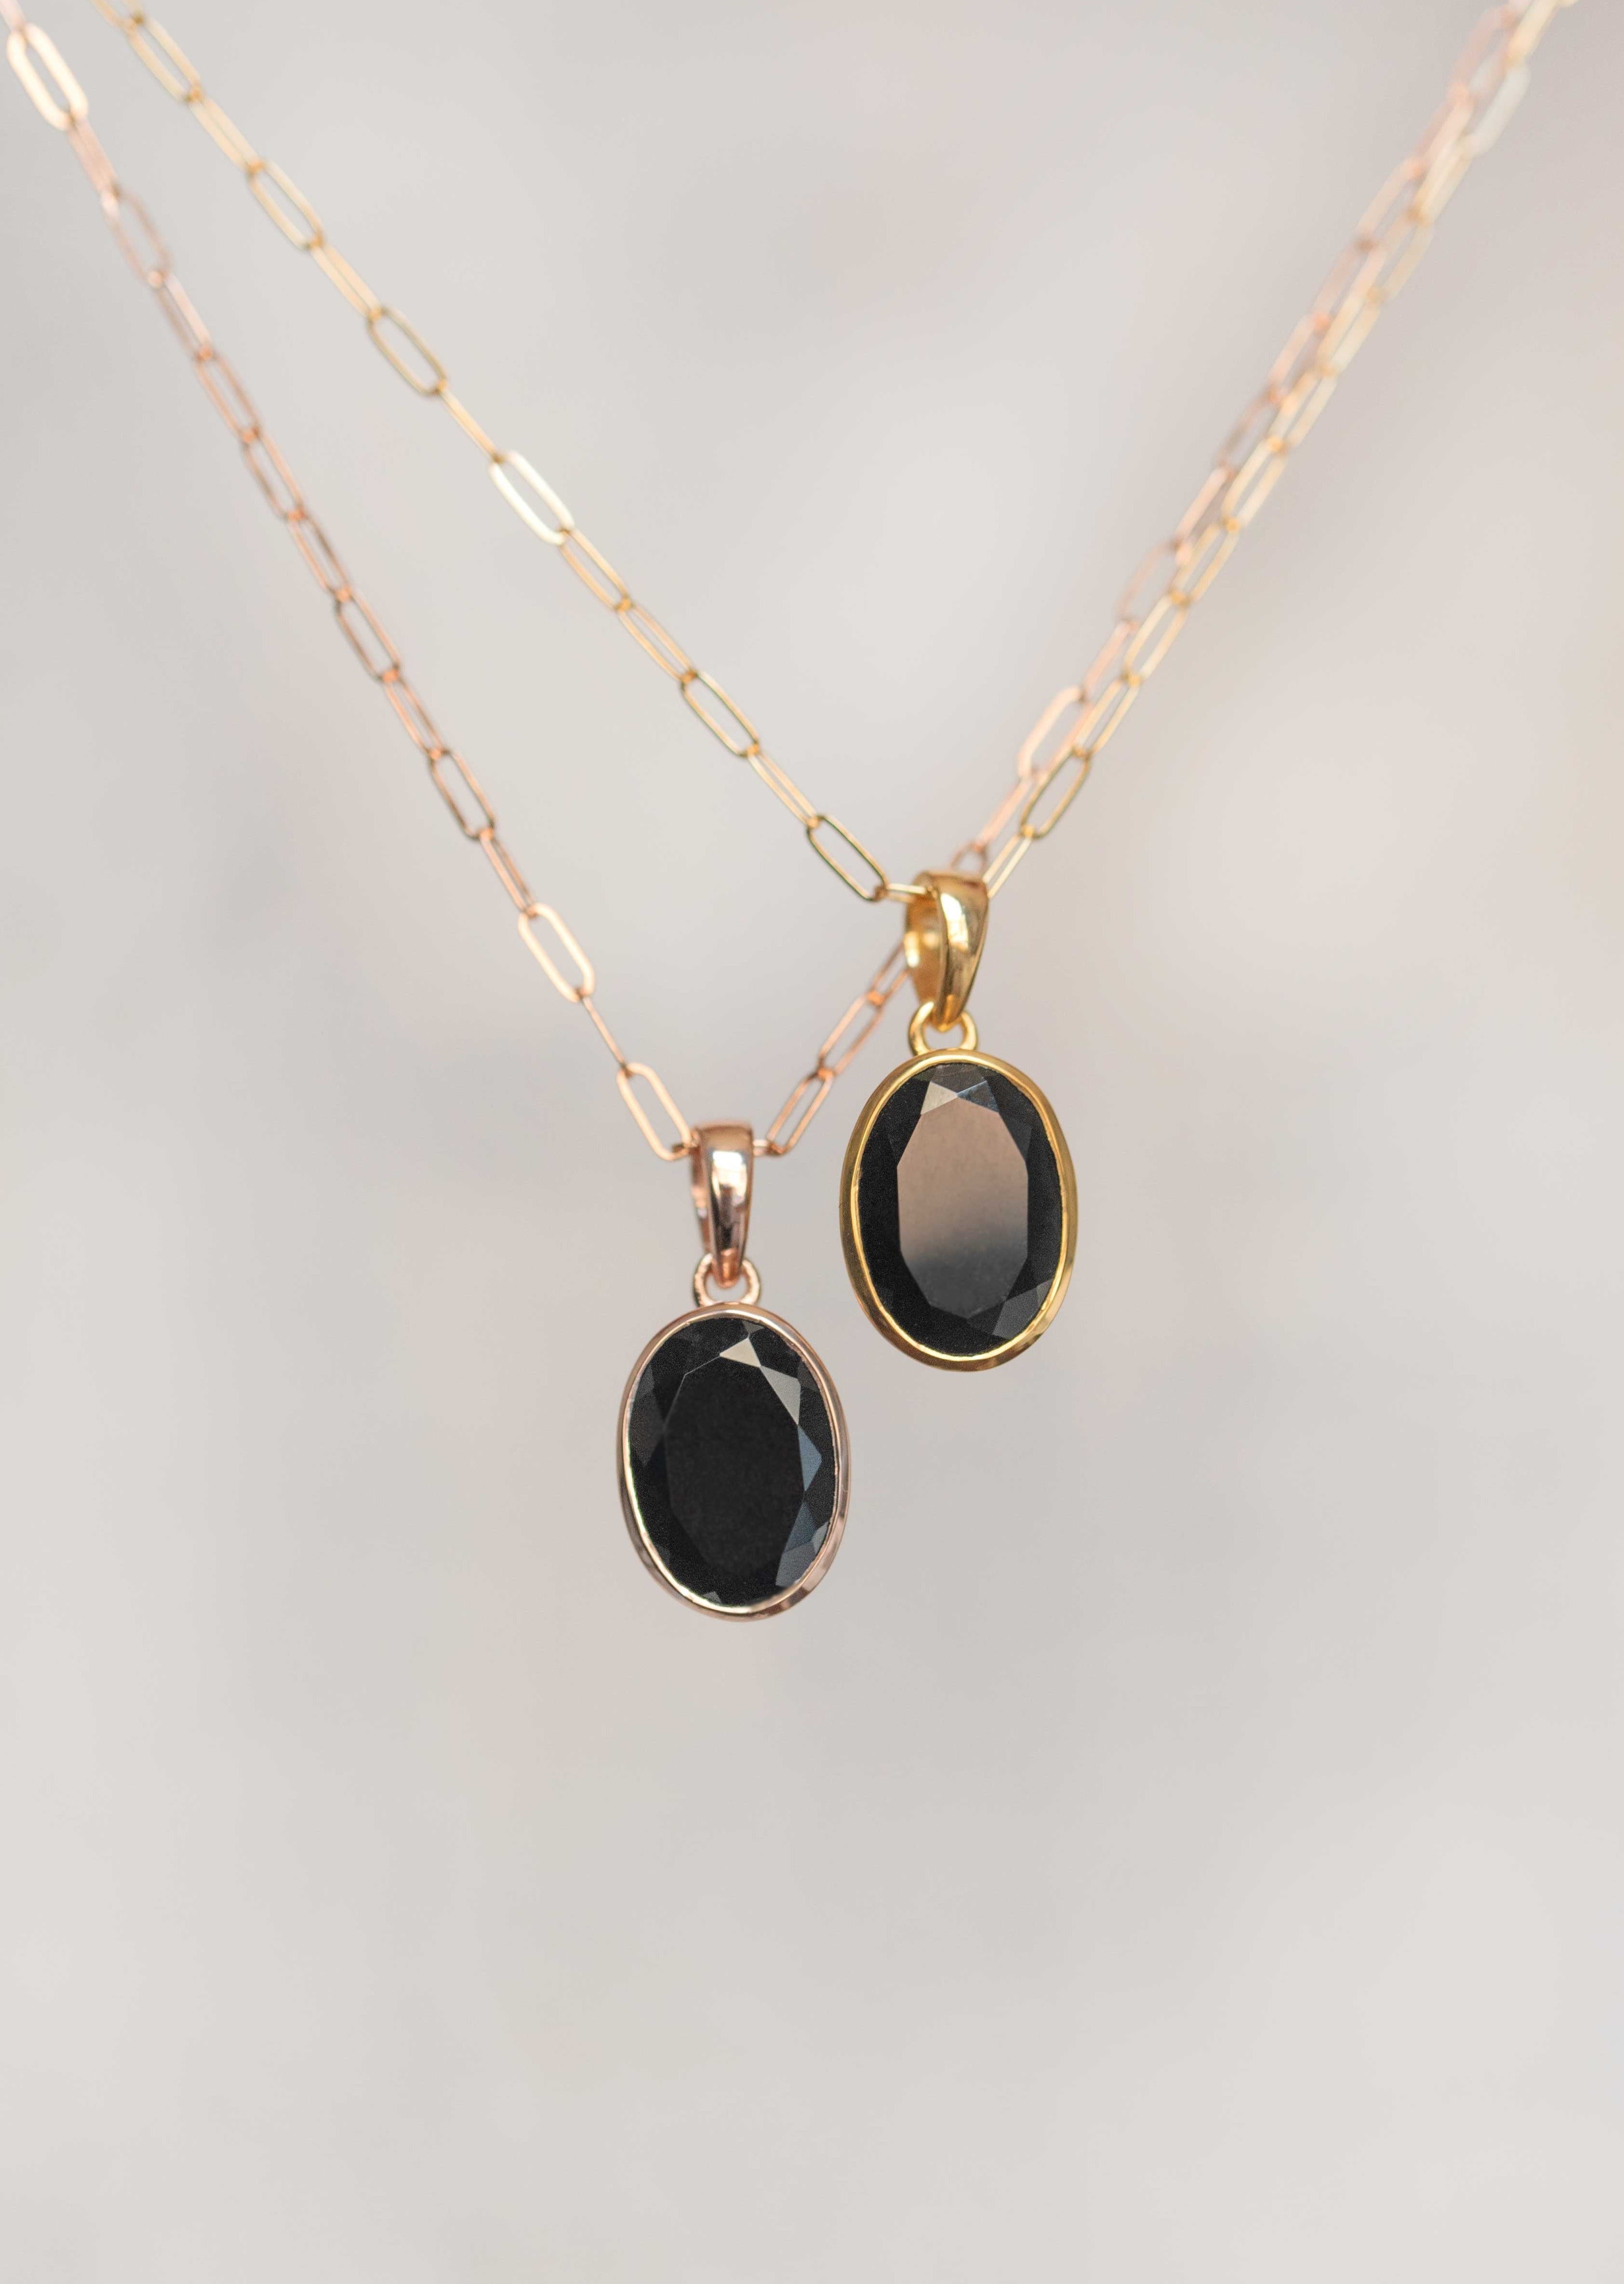 Black Onyx Pendant Necklace oval womens gifts gold